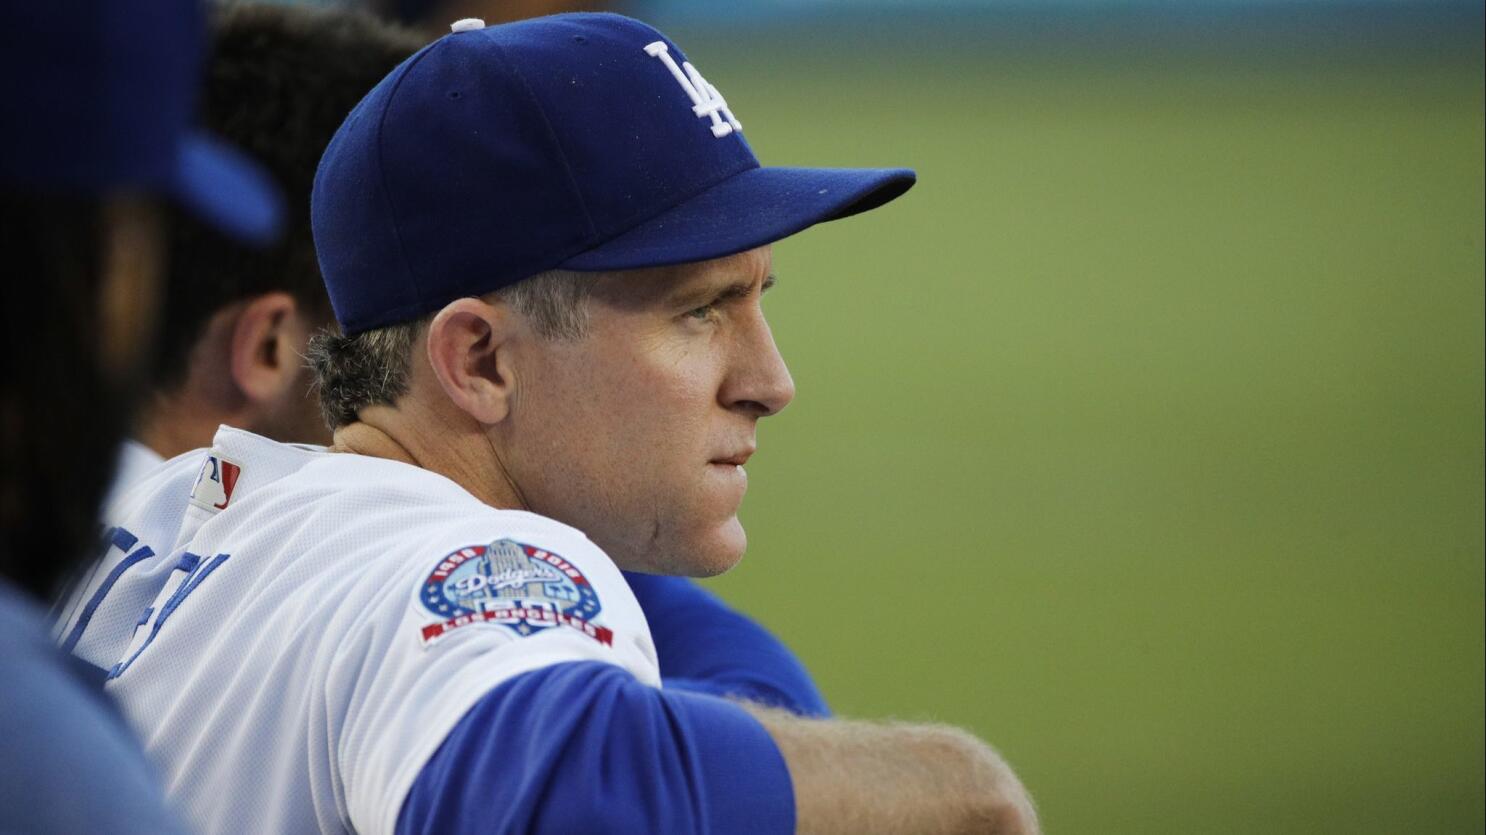 Chase Utley gets high praise from Dodgers teammates in wake of